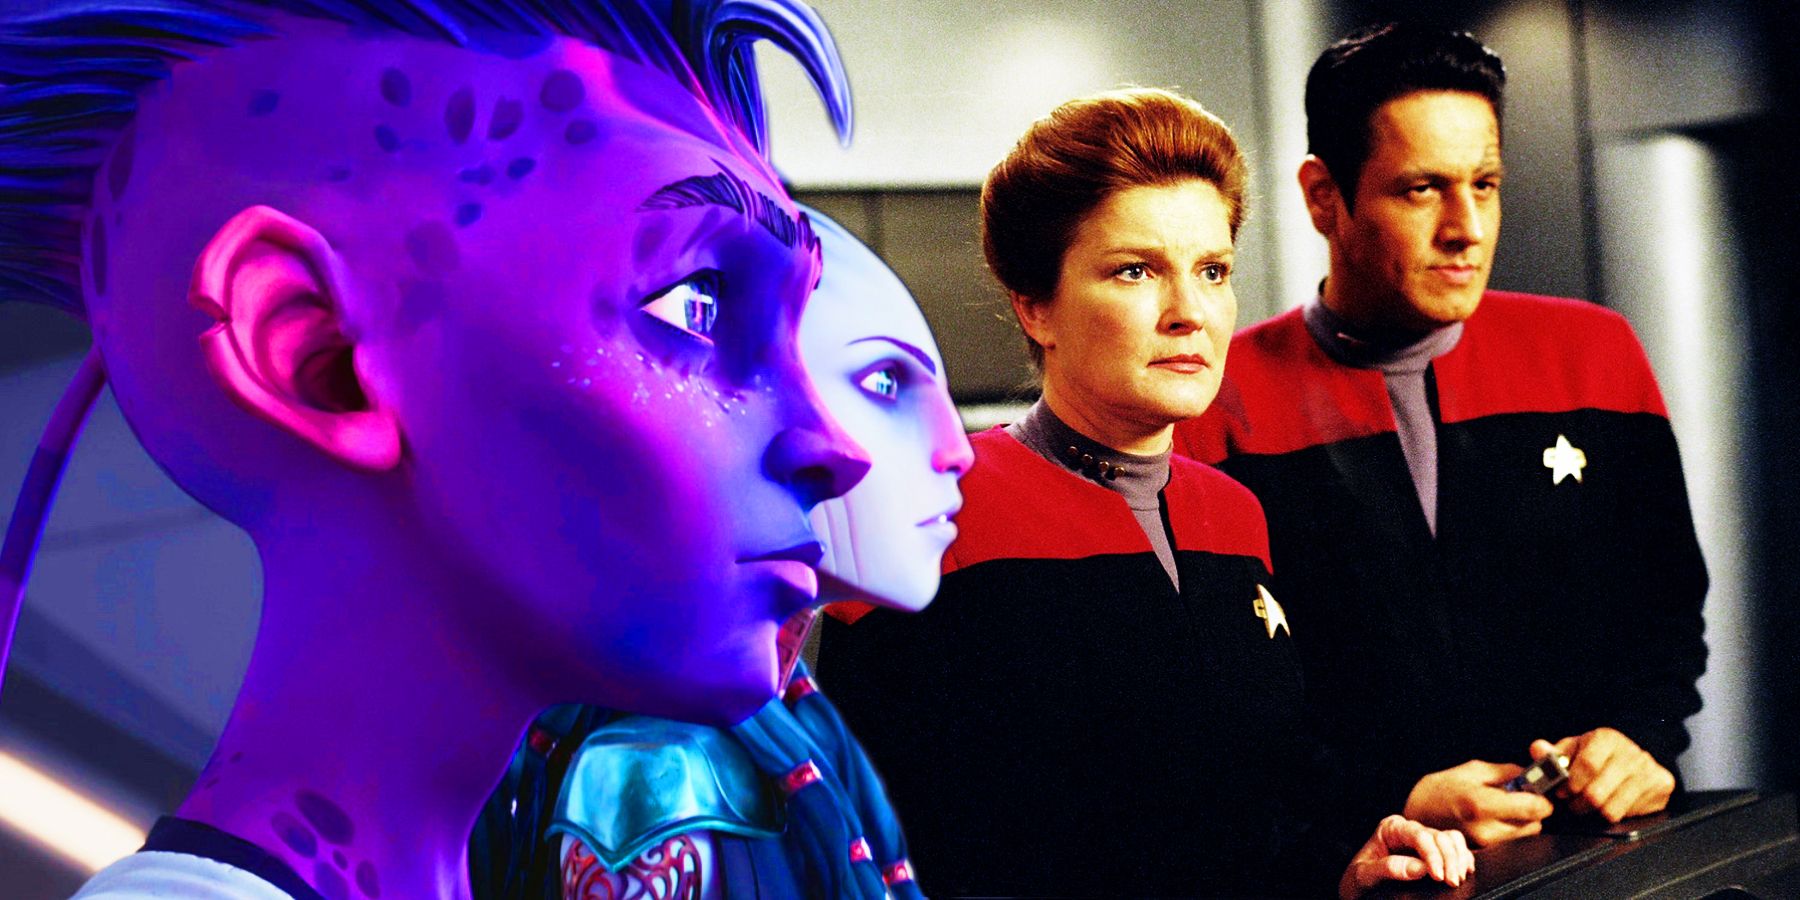 Dal and Gwyn look to the right as Janeway and Chakotay look concerned.